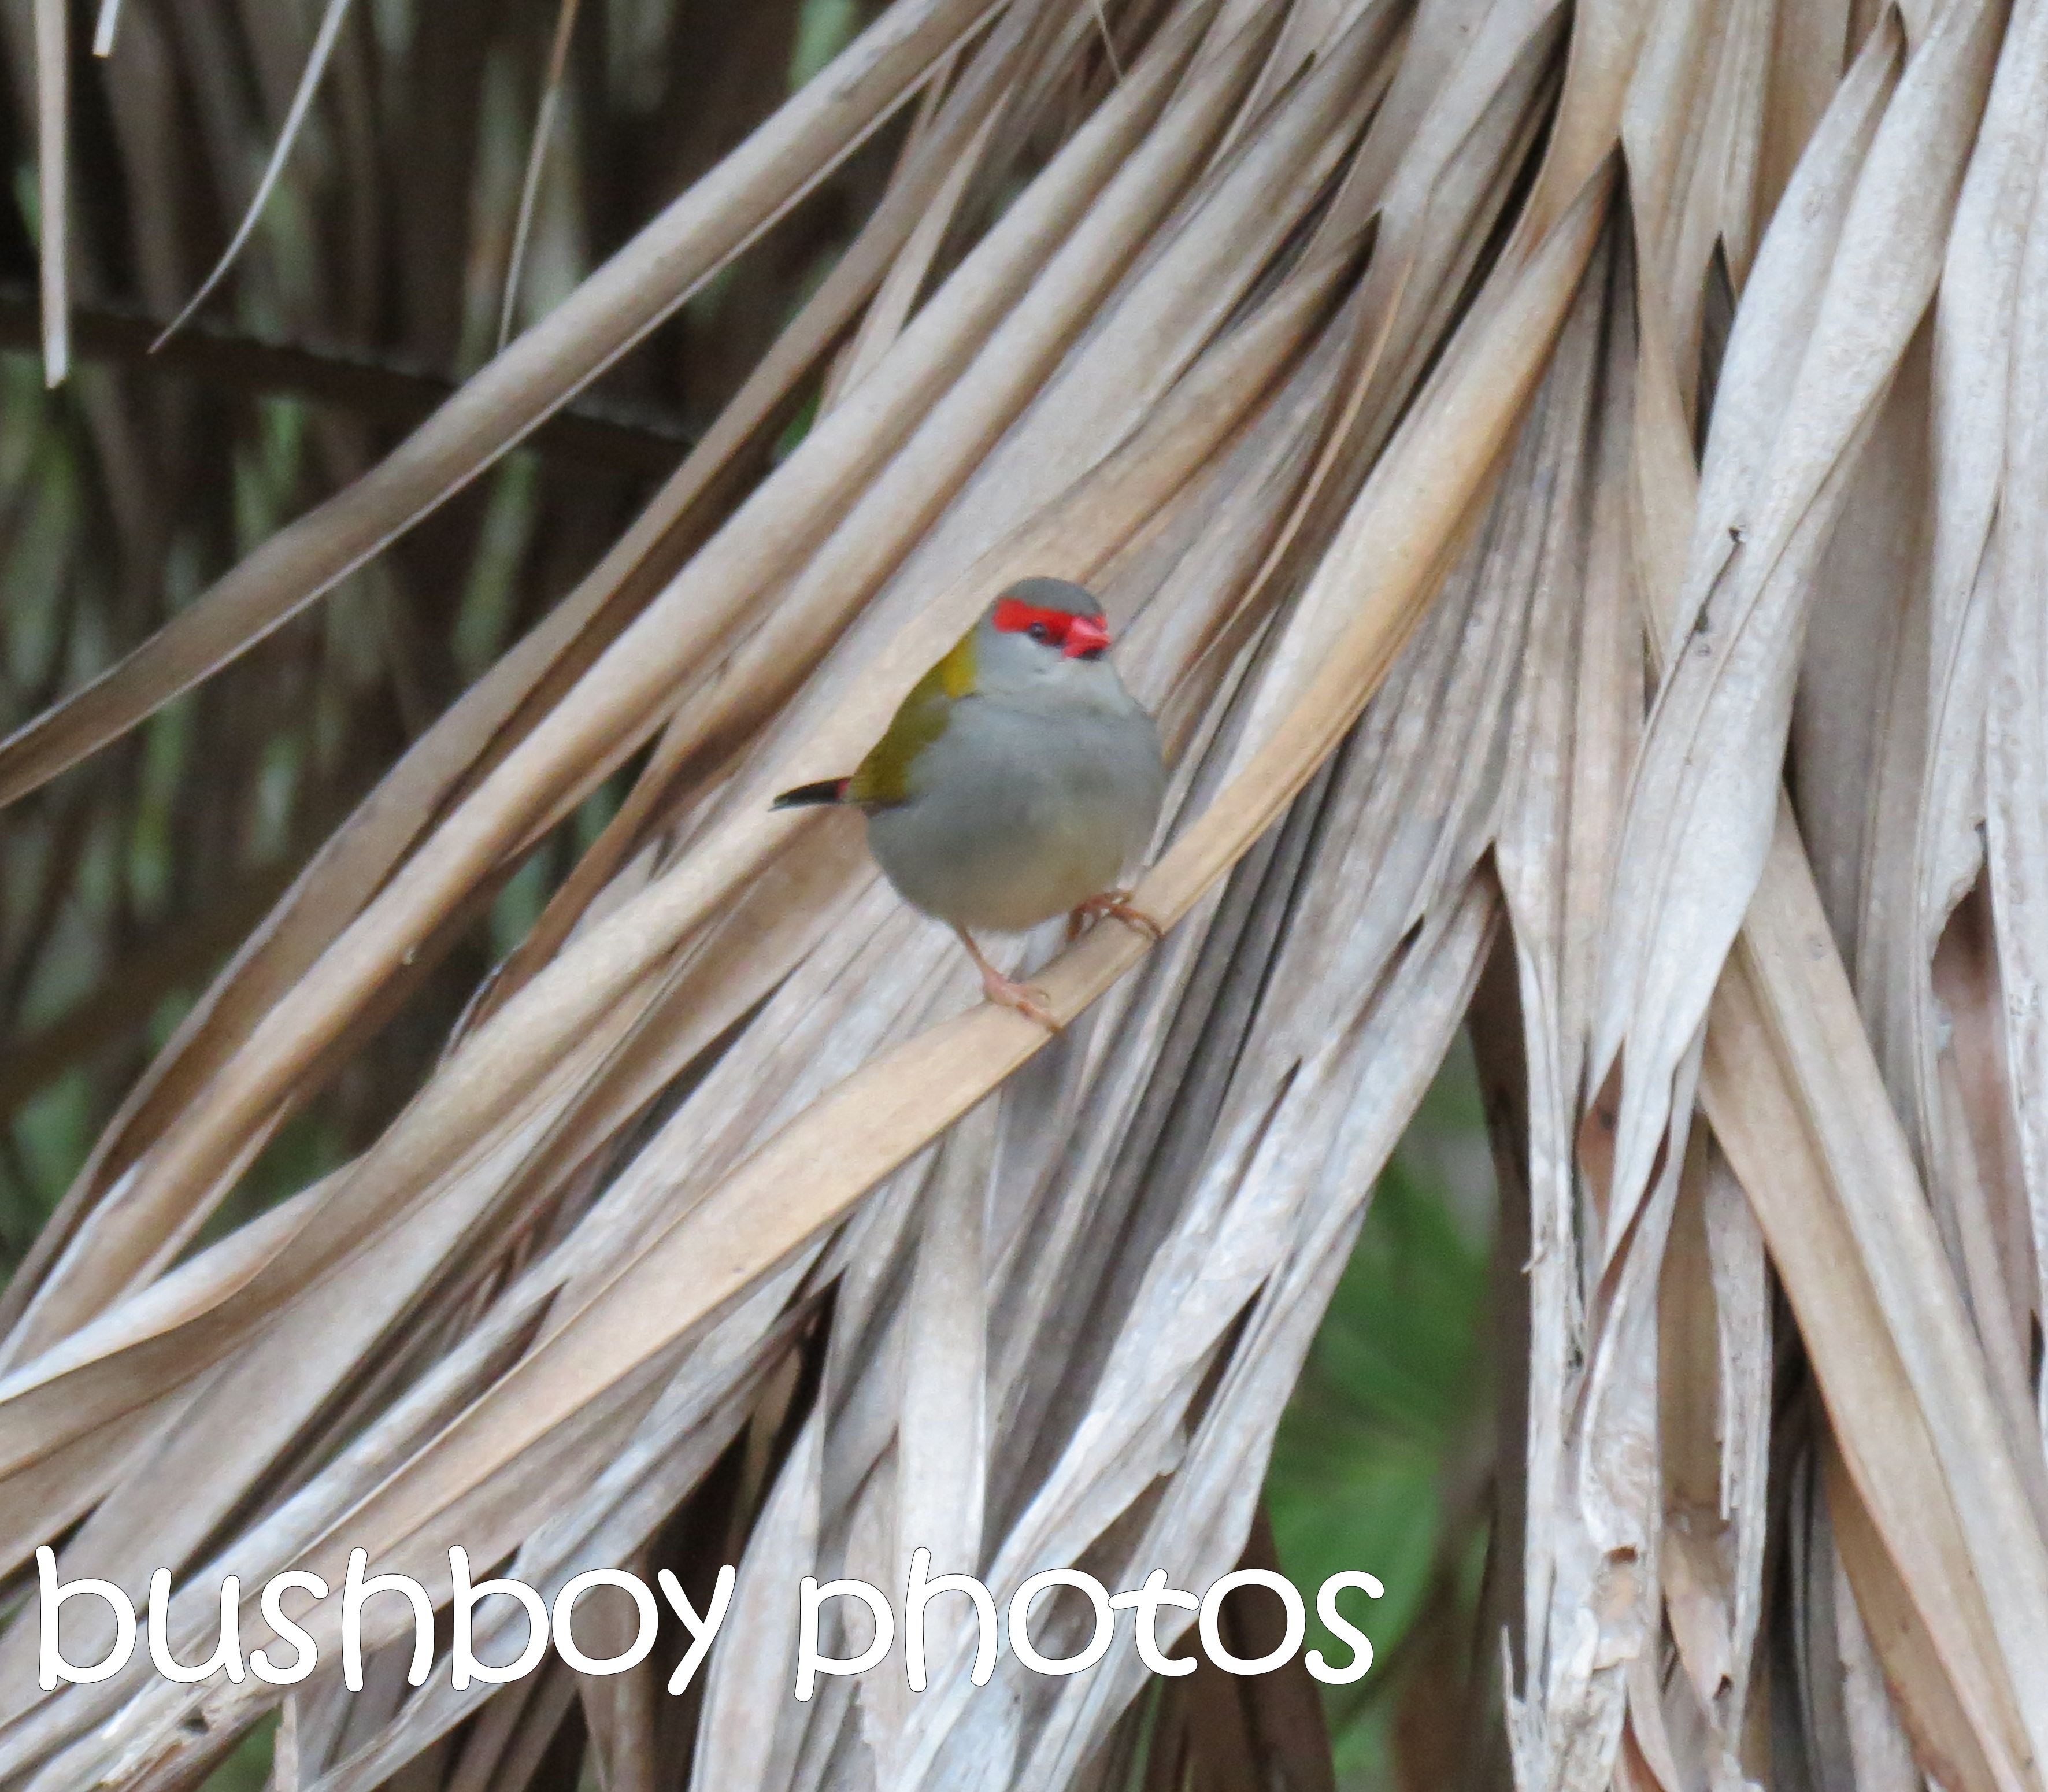 red browed finch_palm_named_home_jul;y 2016